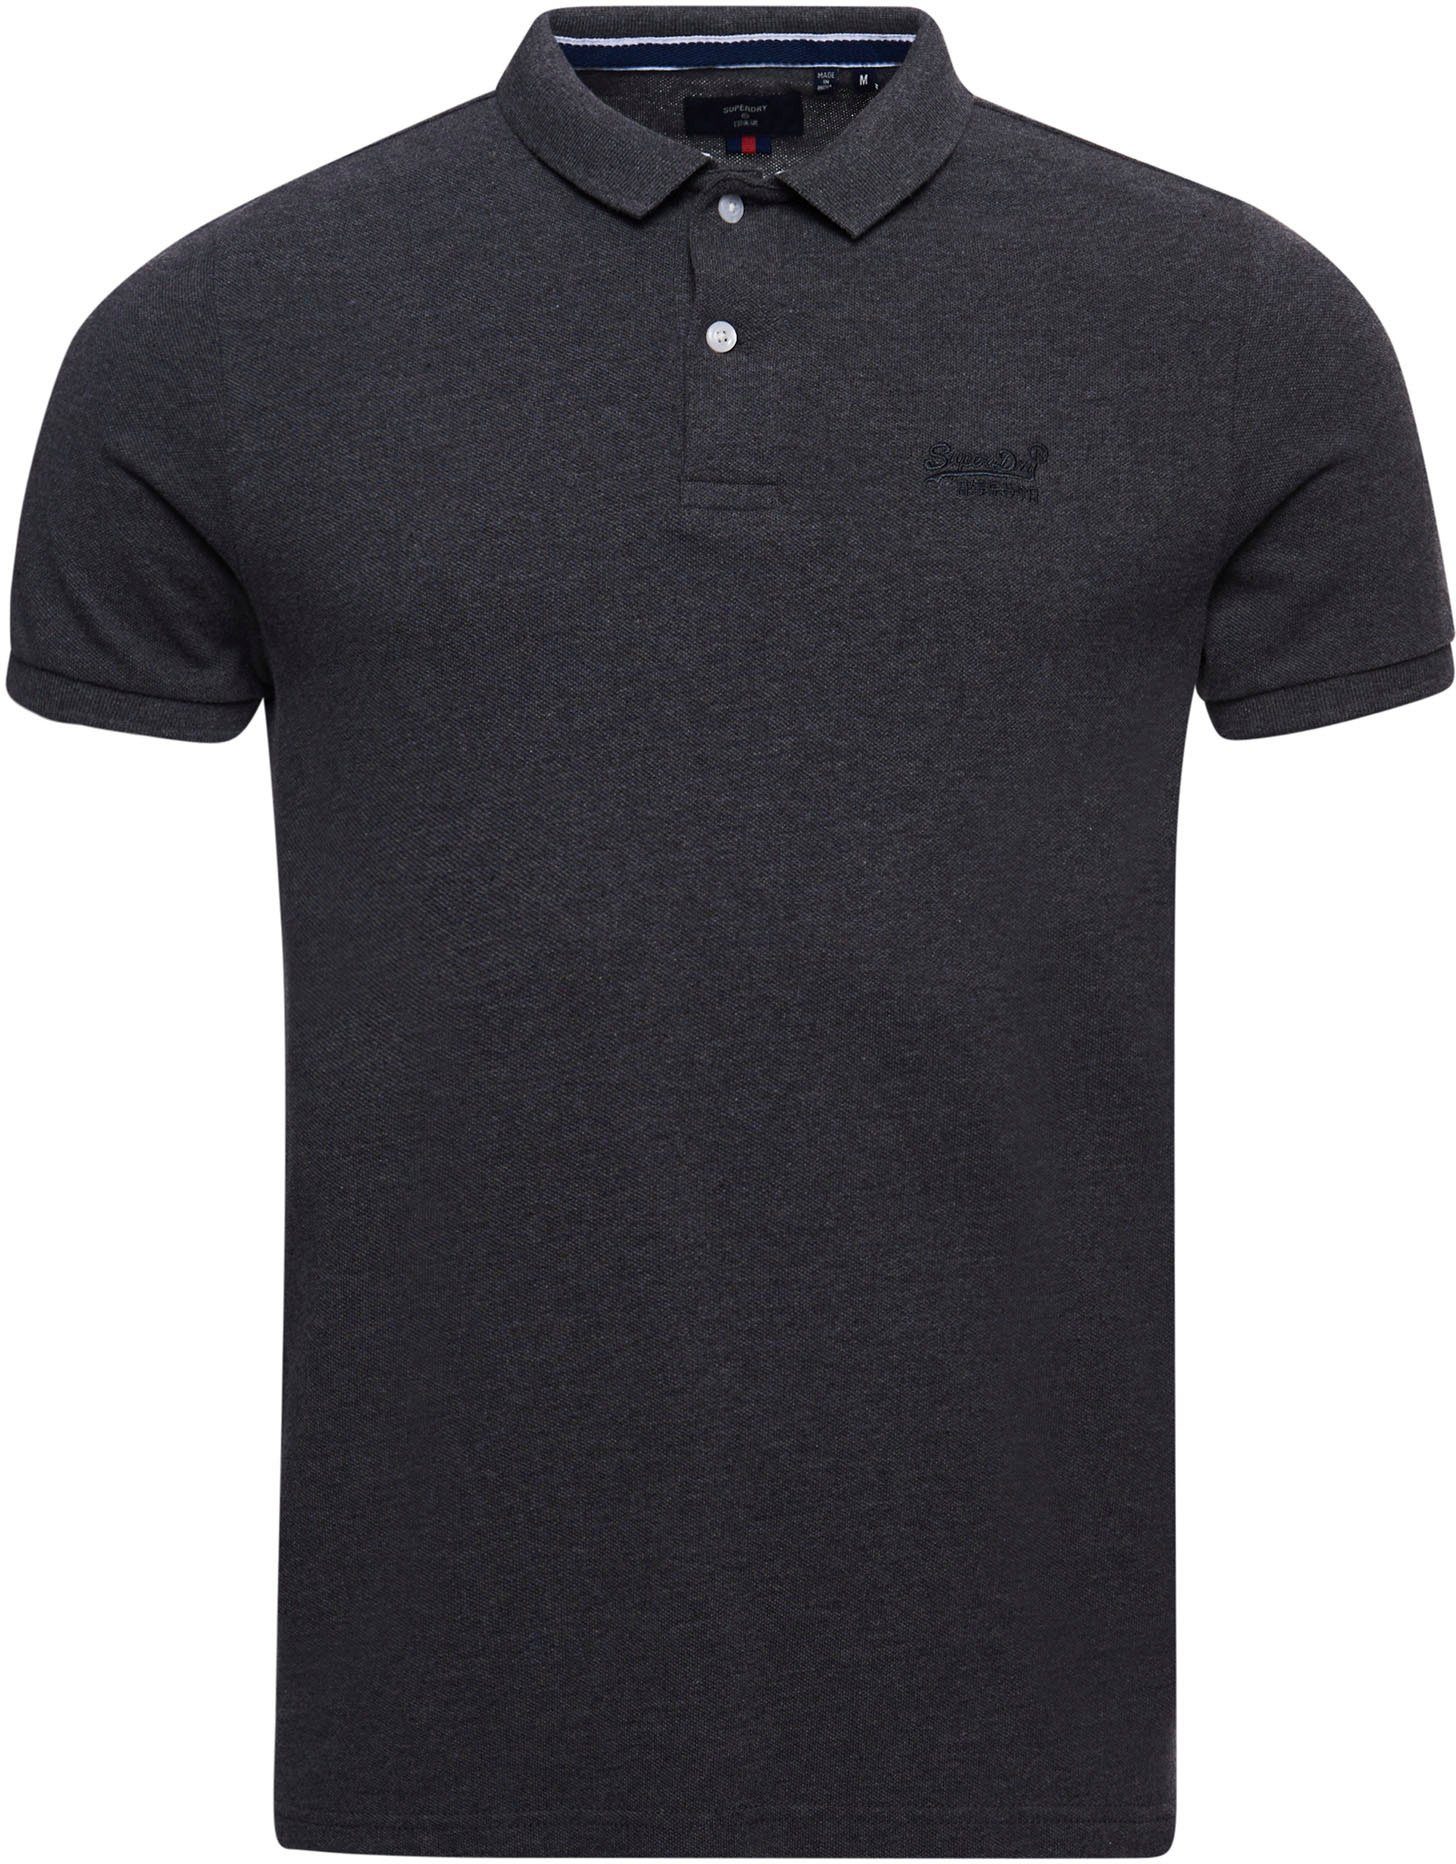 marl Superdry CLASSIC PIQUE POLO Poloshirt charcoal rich